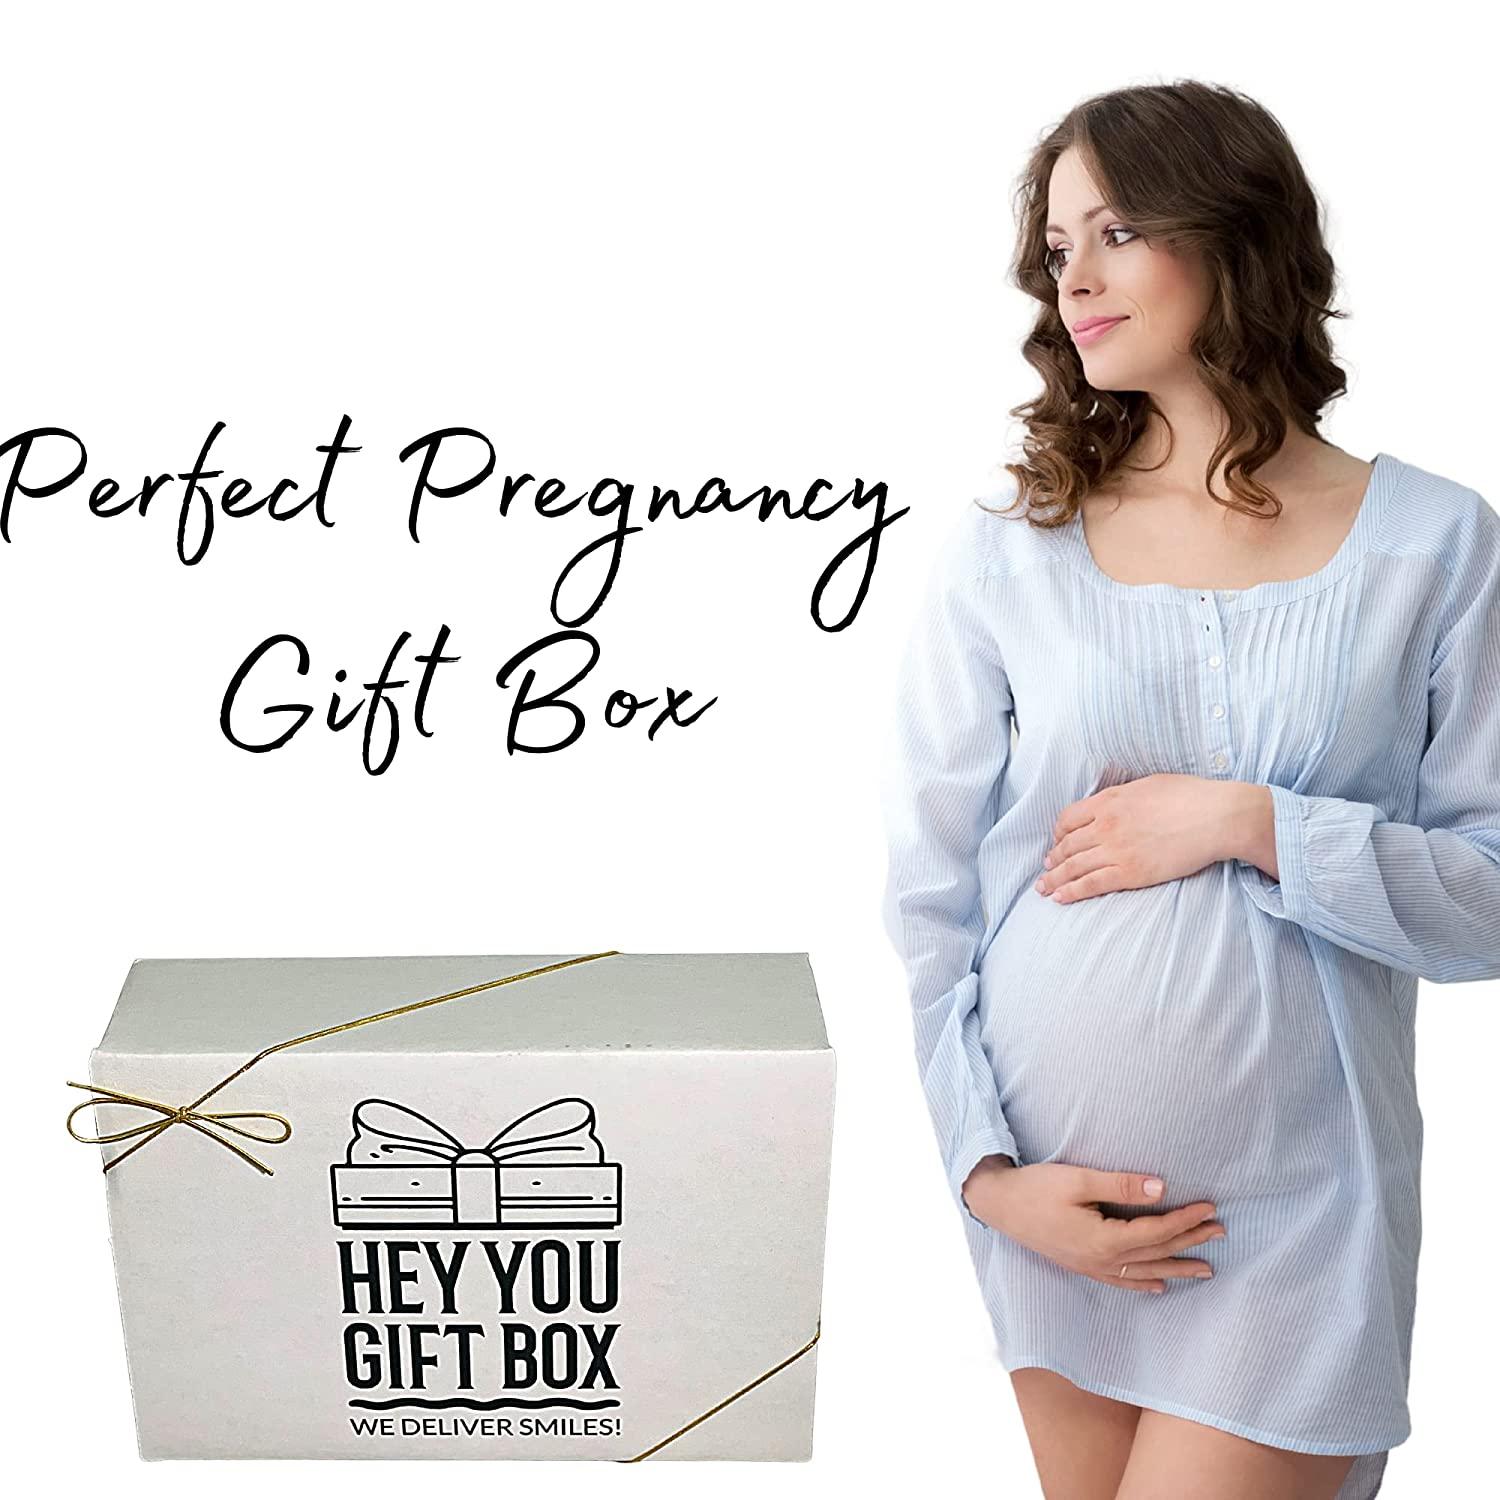 22 Thoughtful Gifts for Pregnant Women That She'll Love